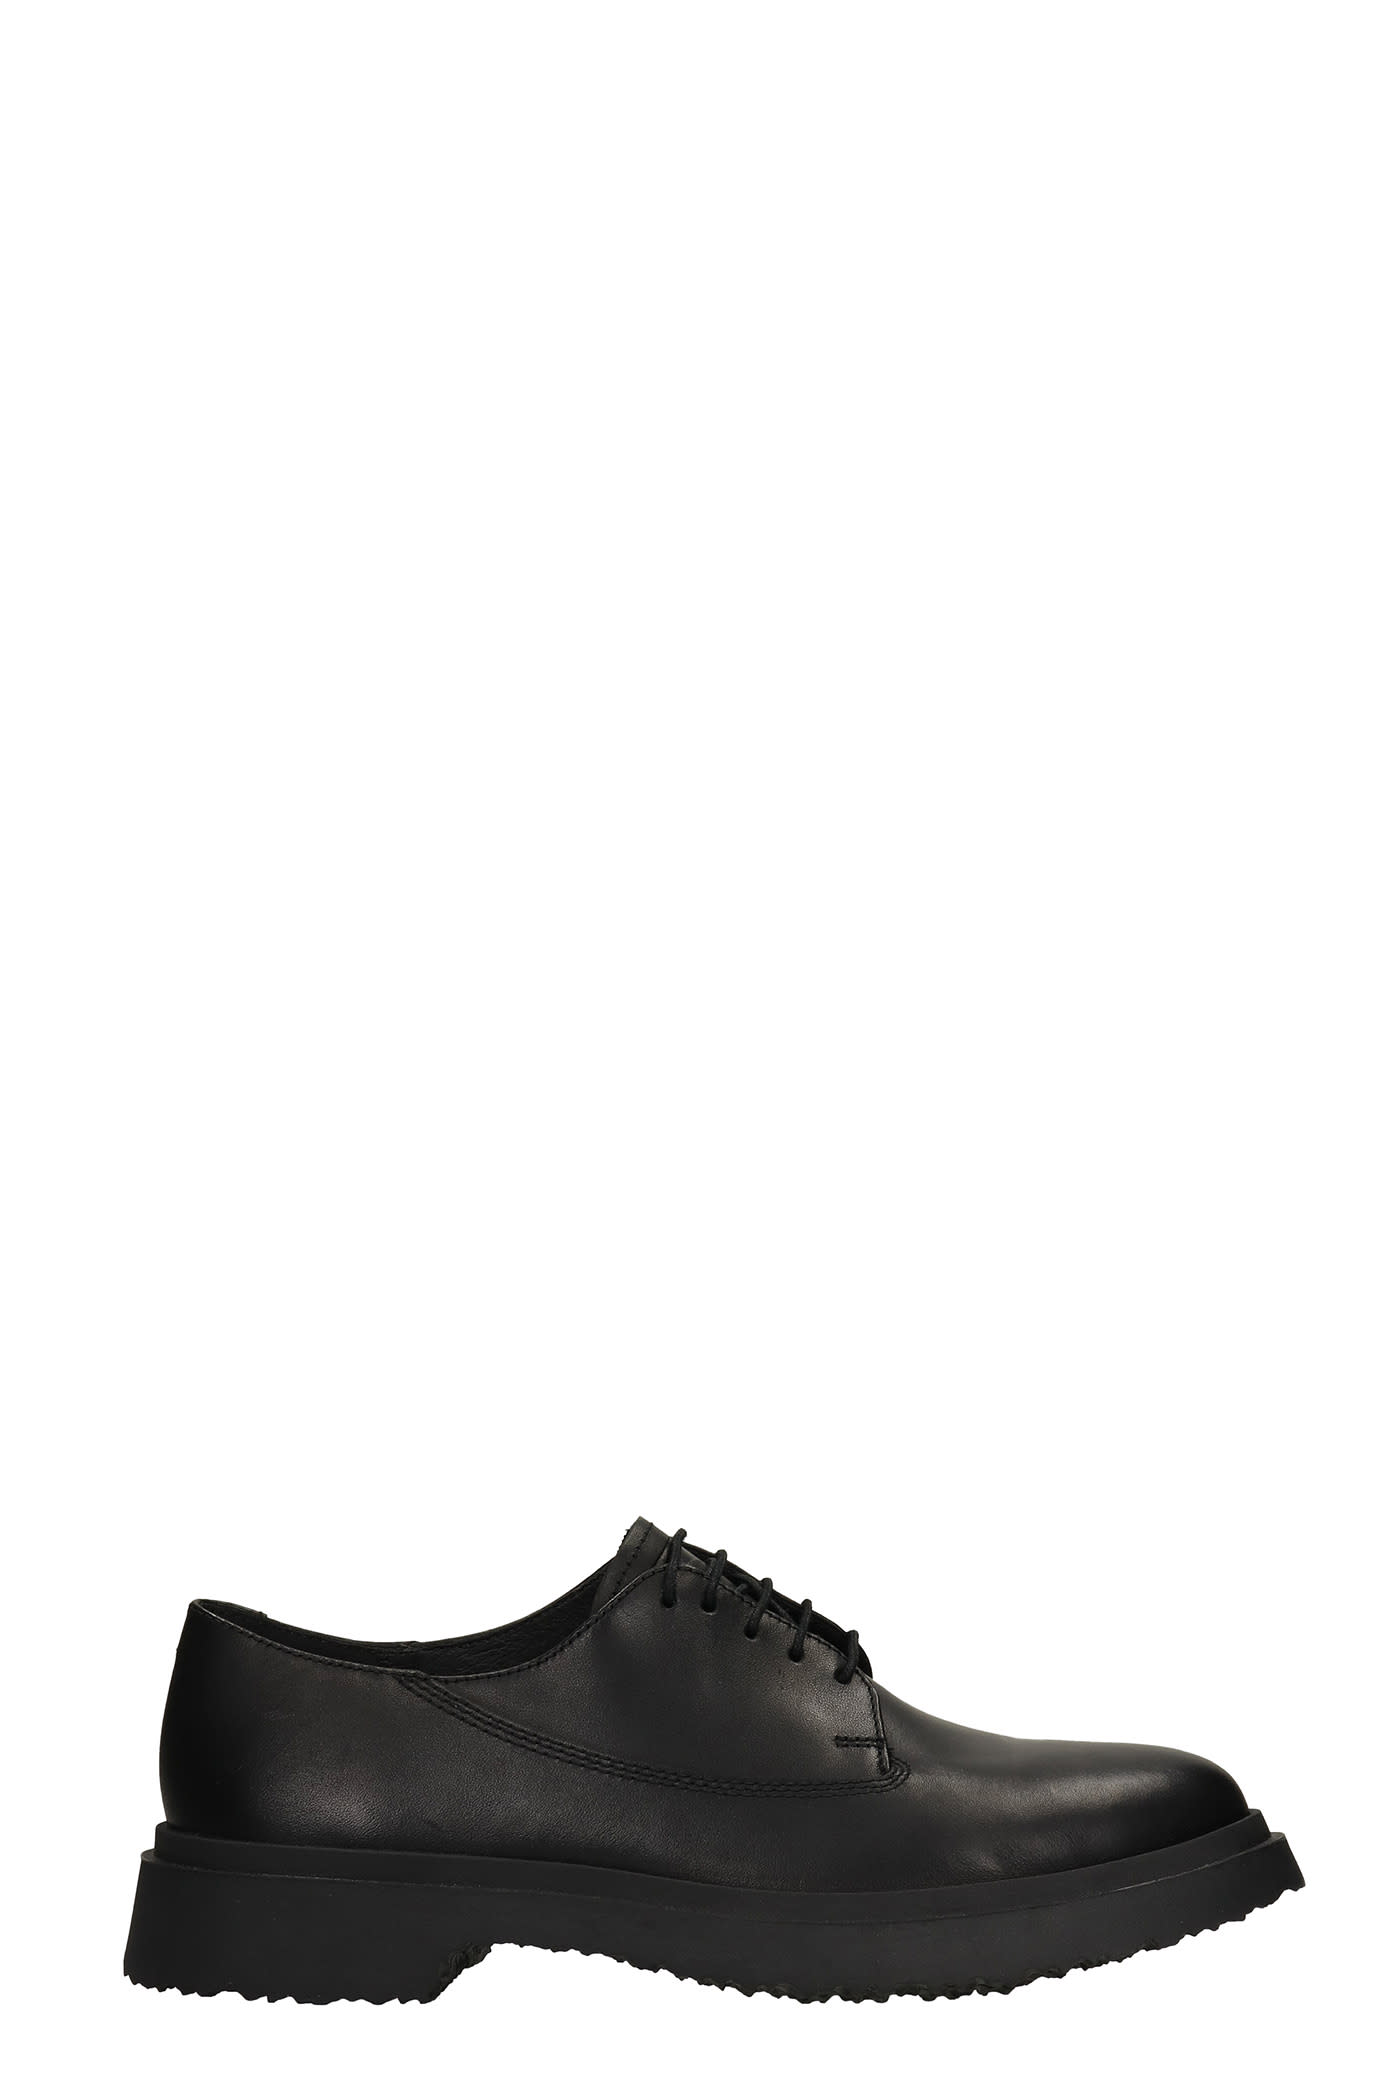 Camper Walden Lace Up Shoes In Black Leather